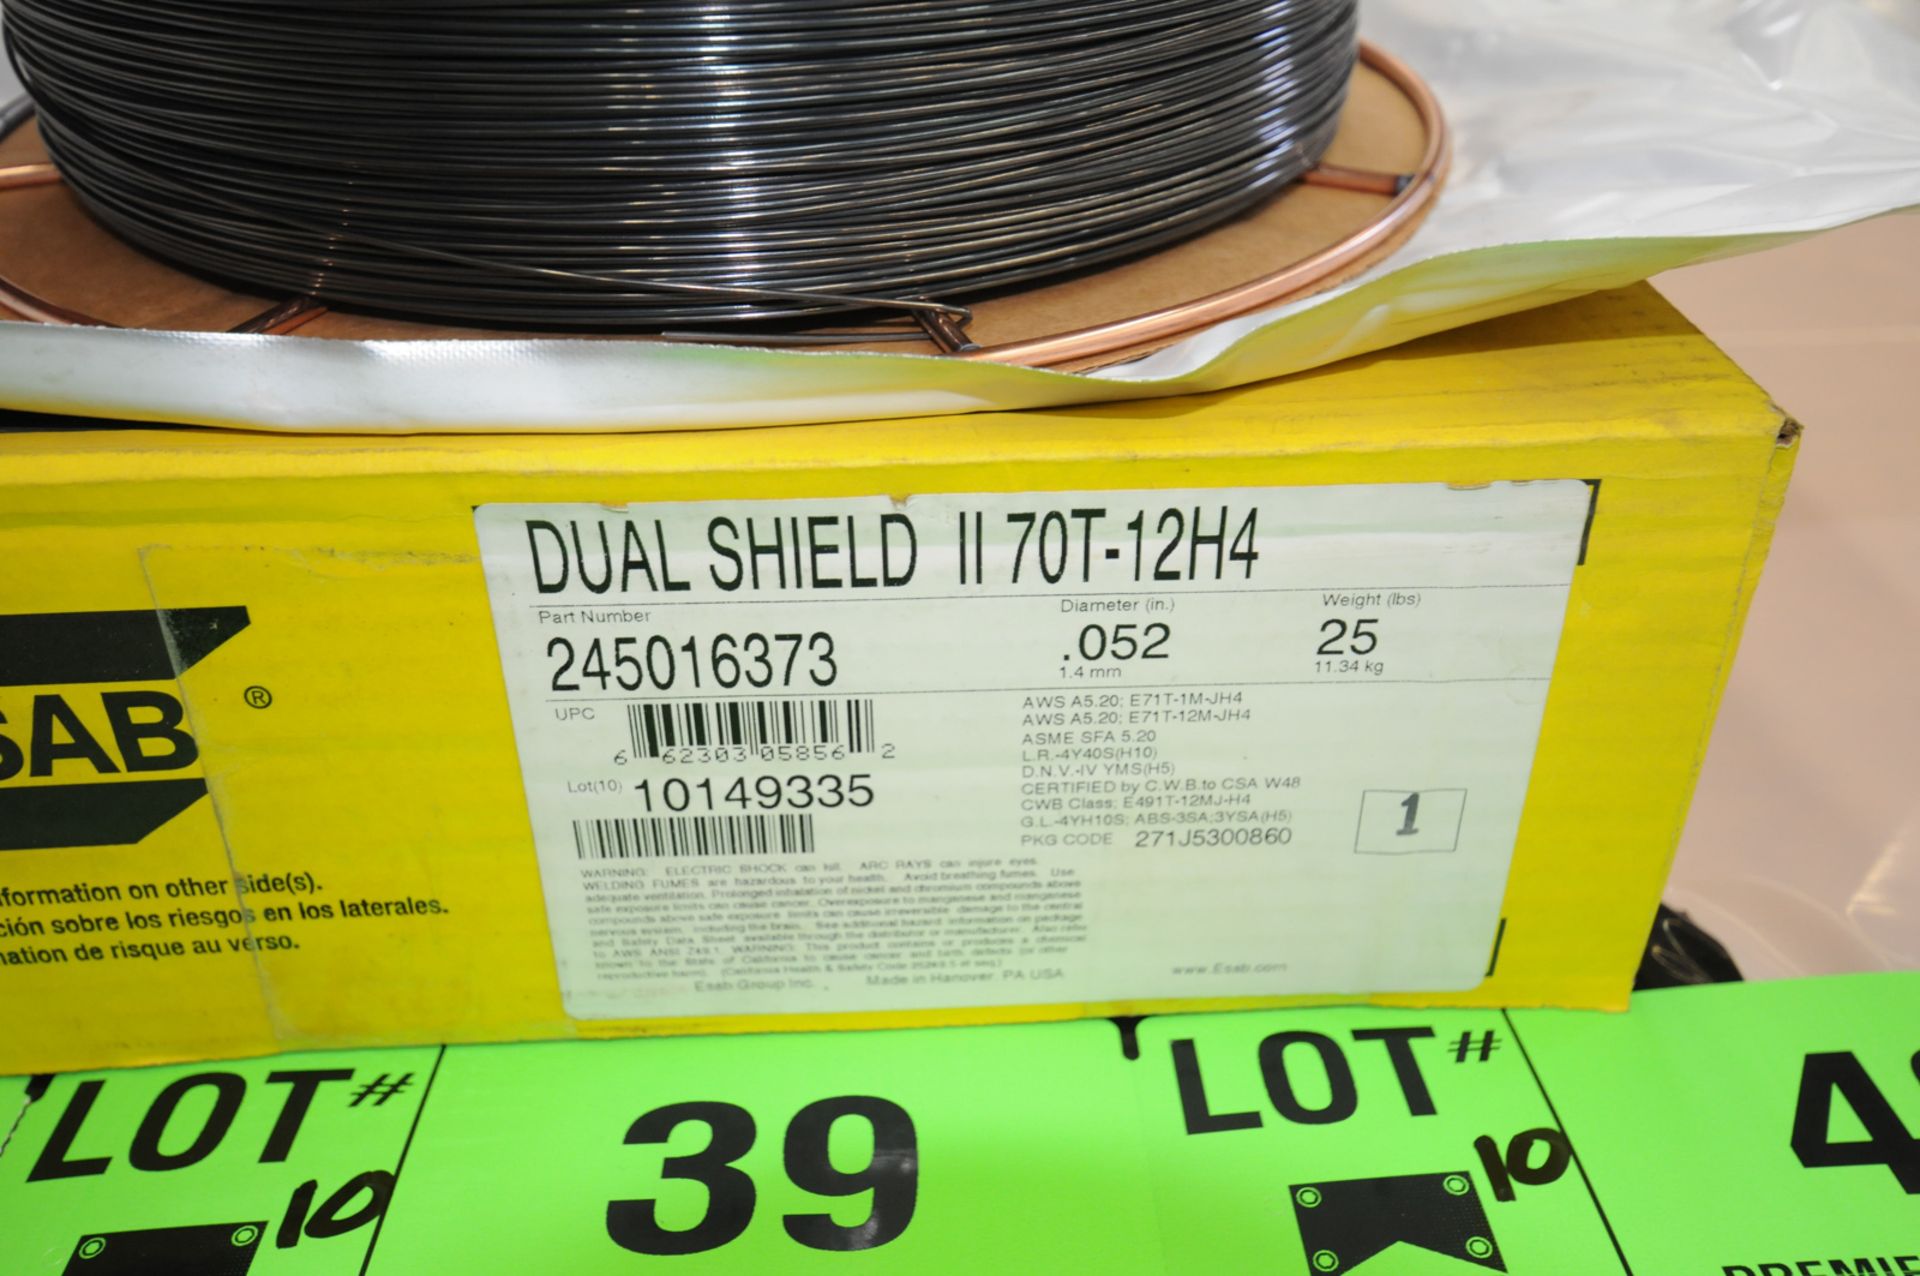 LOT/ (10) 25LB SPOOLS OF ESAB DUAL SHIELD II 70T-12H4 0.052" DIAMETER WELDING WIRE CONFORMING TO AWS - Image 2 of 3